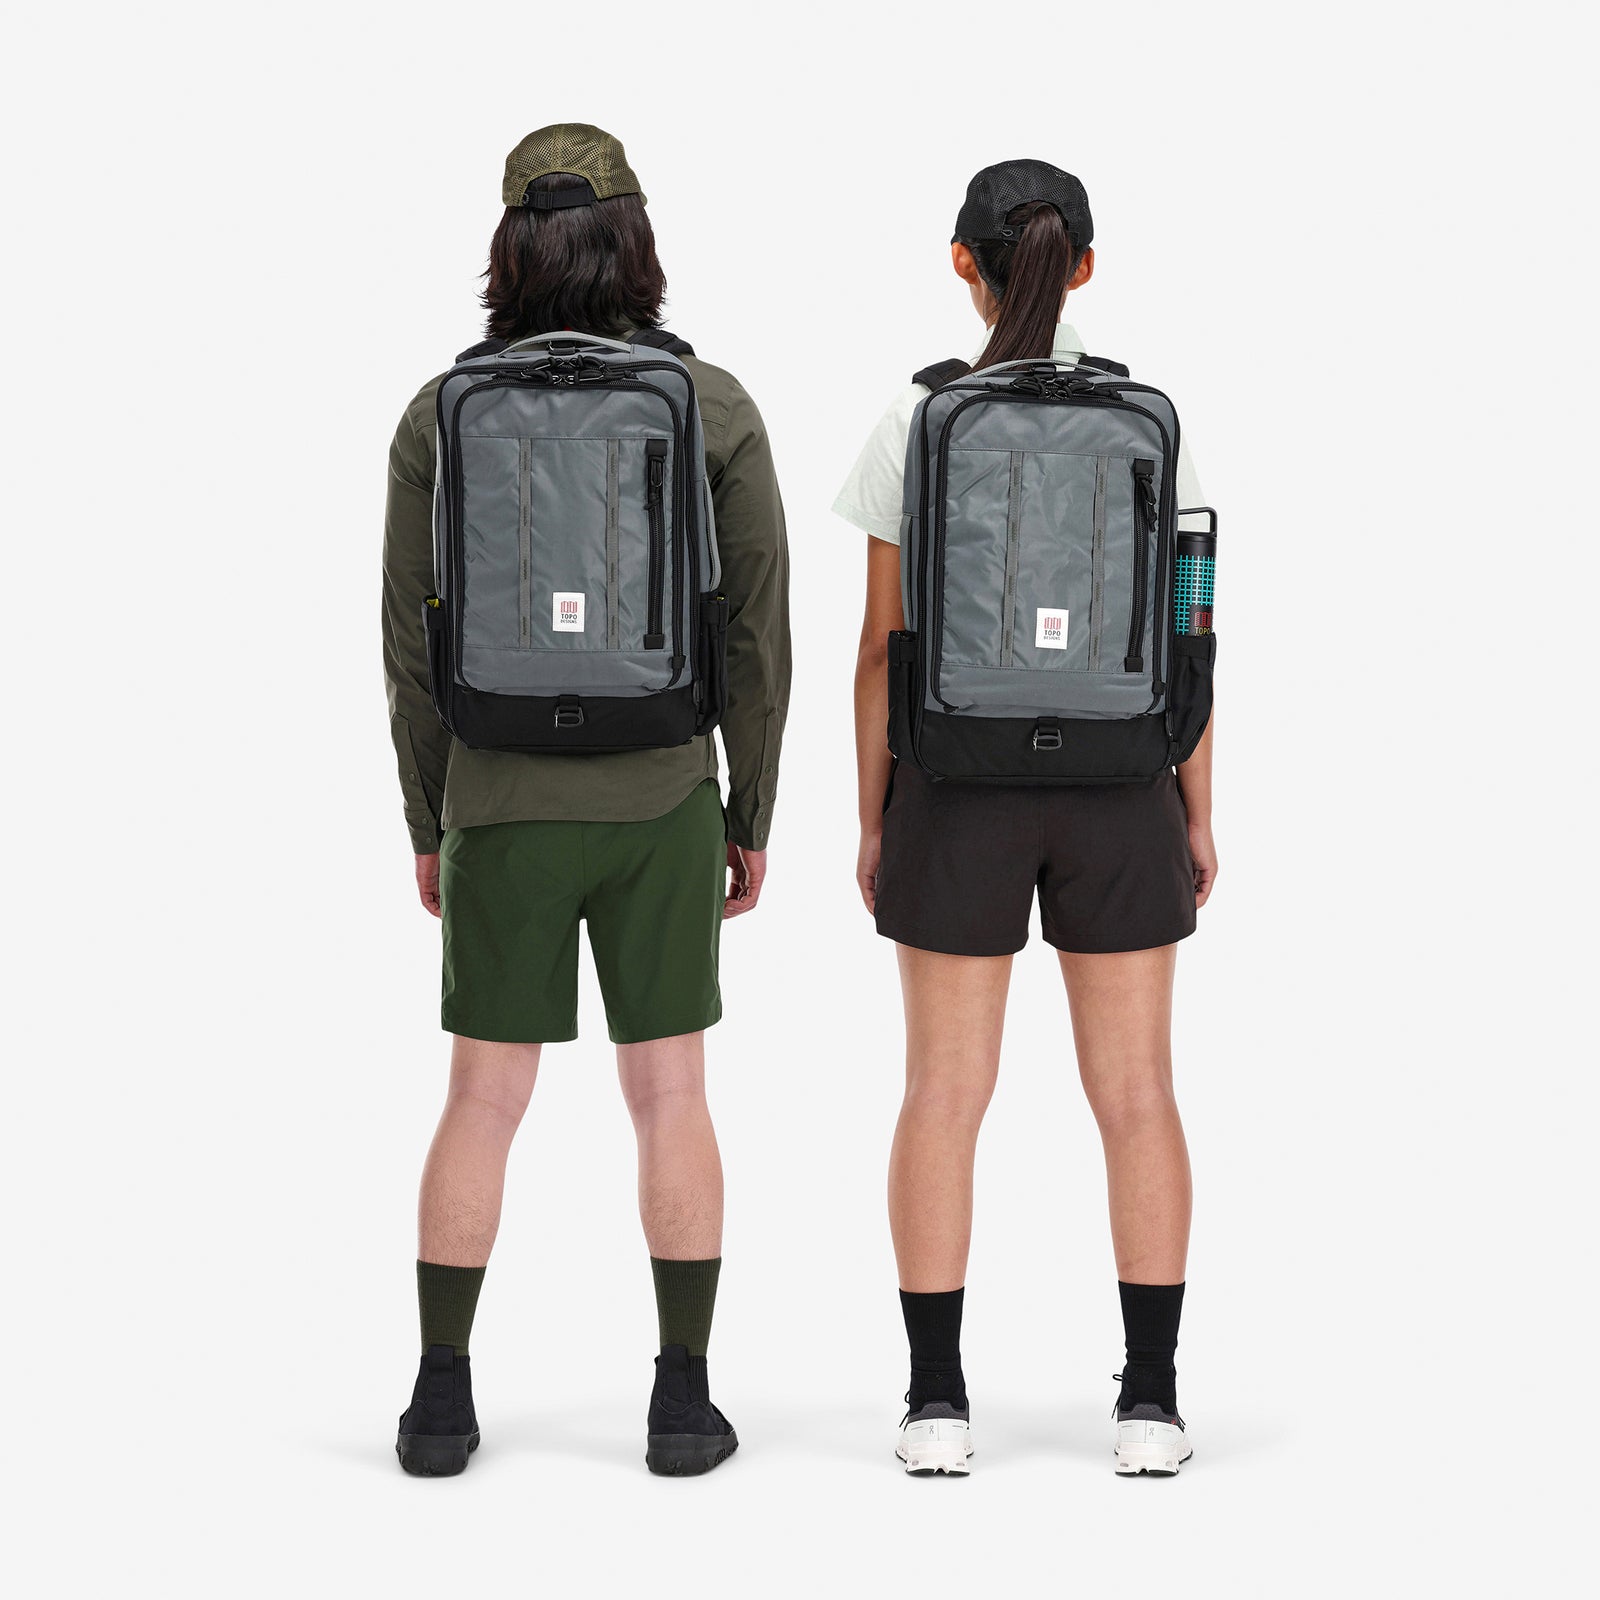 General shot of models wearing Topo Designs Global Travel Bag 30L Durable Carry On Convertible Laptop Travel Backpack in Charcoal gray.